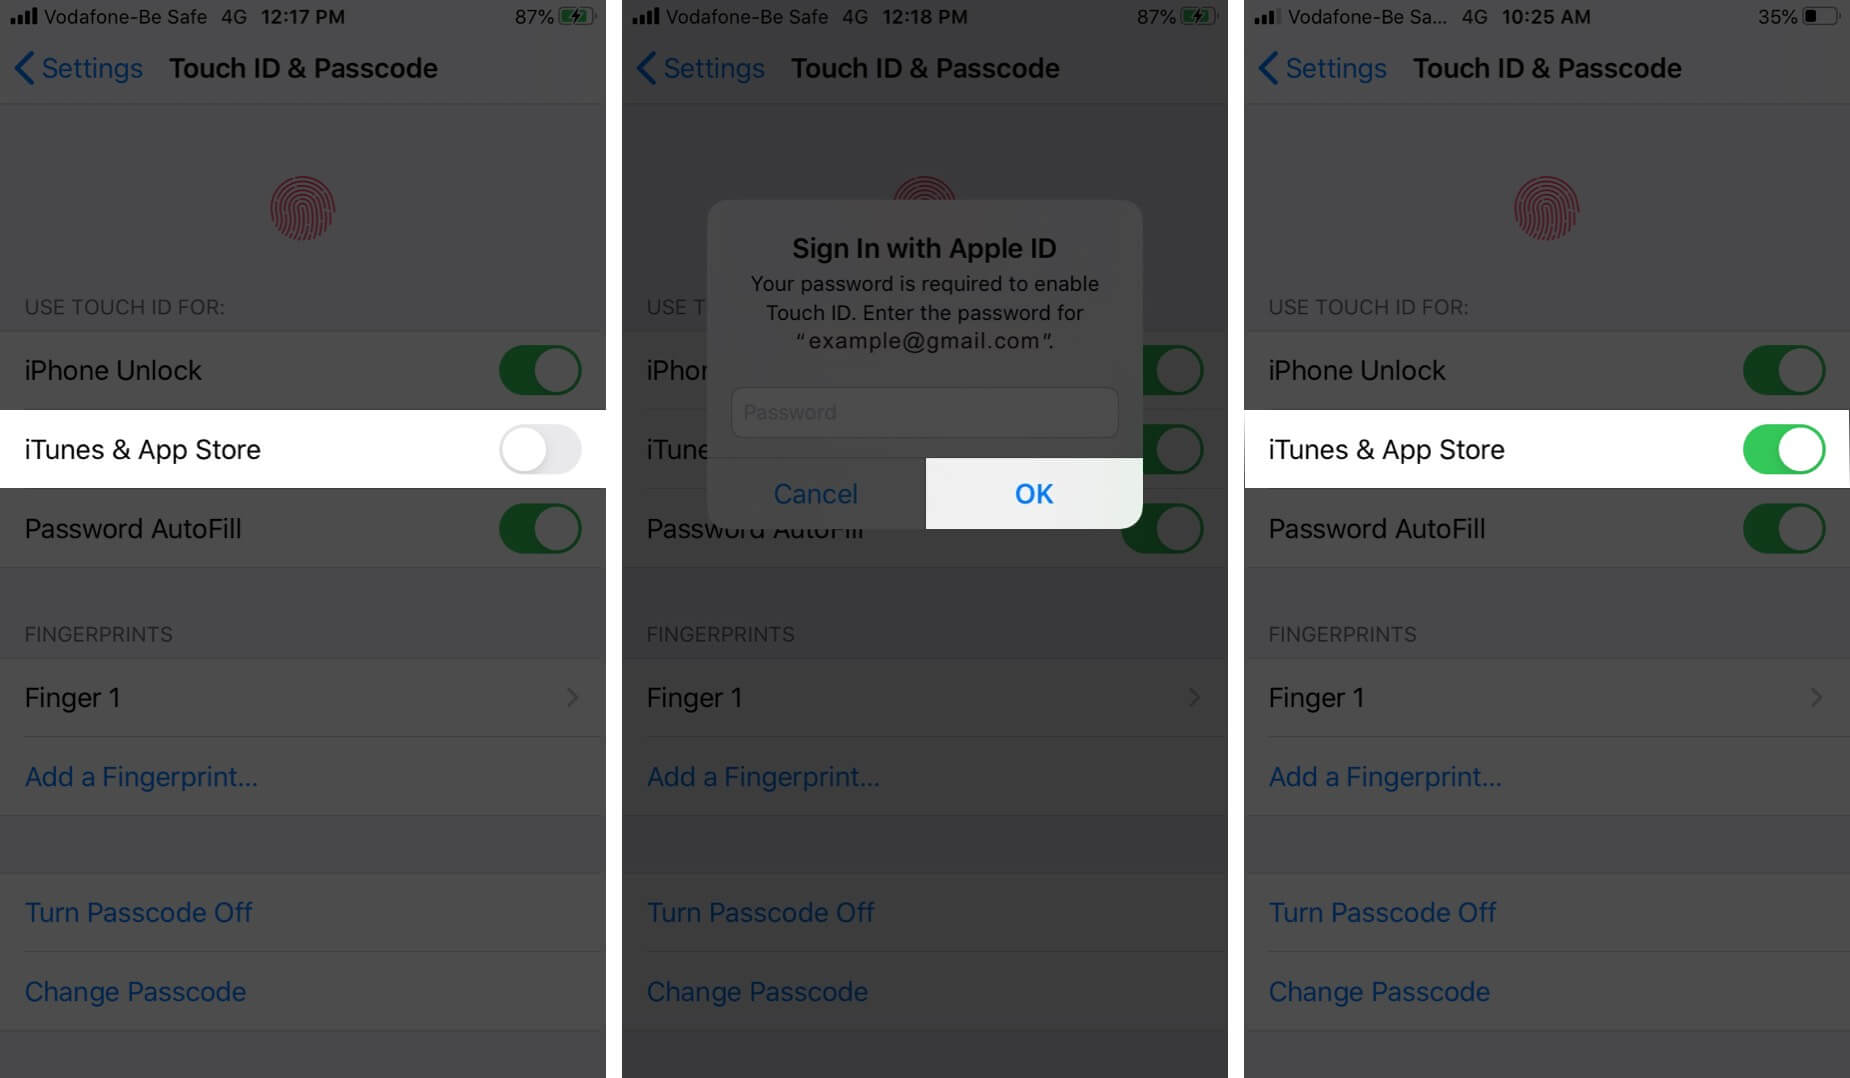 Turn On iTunes & App Store in Touch ID & Passcode on iPhone